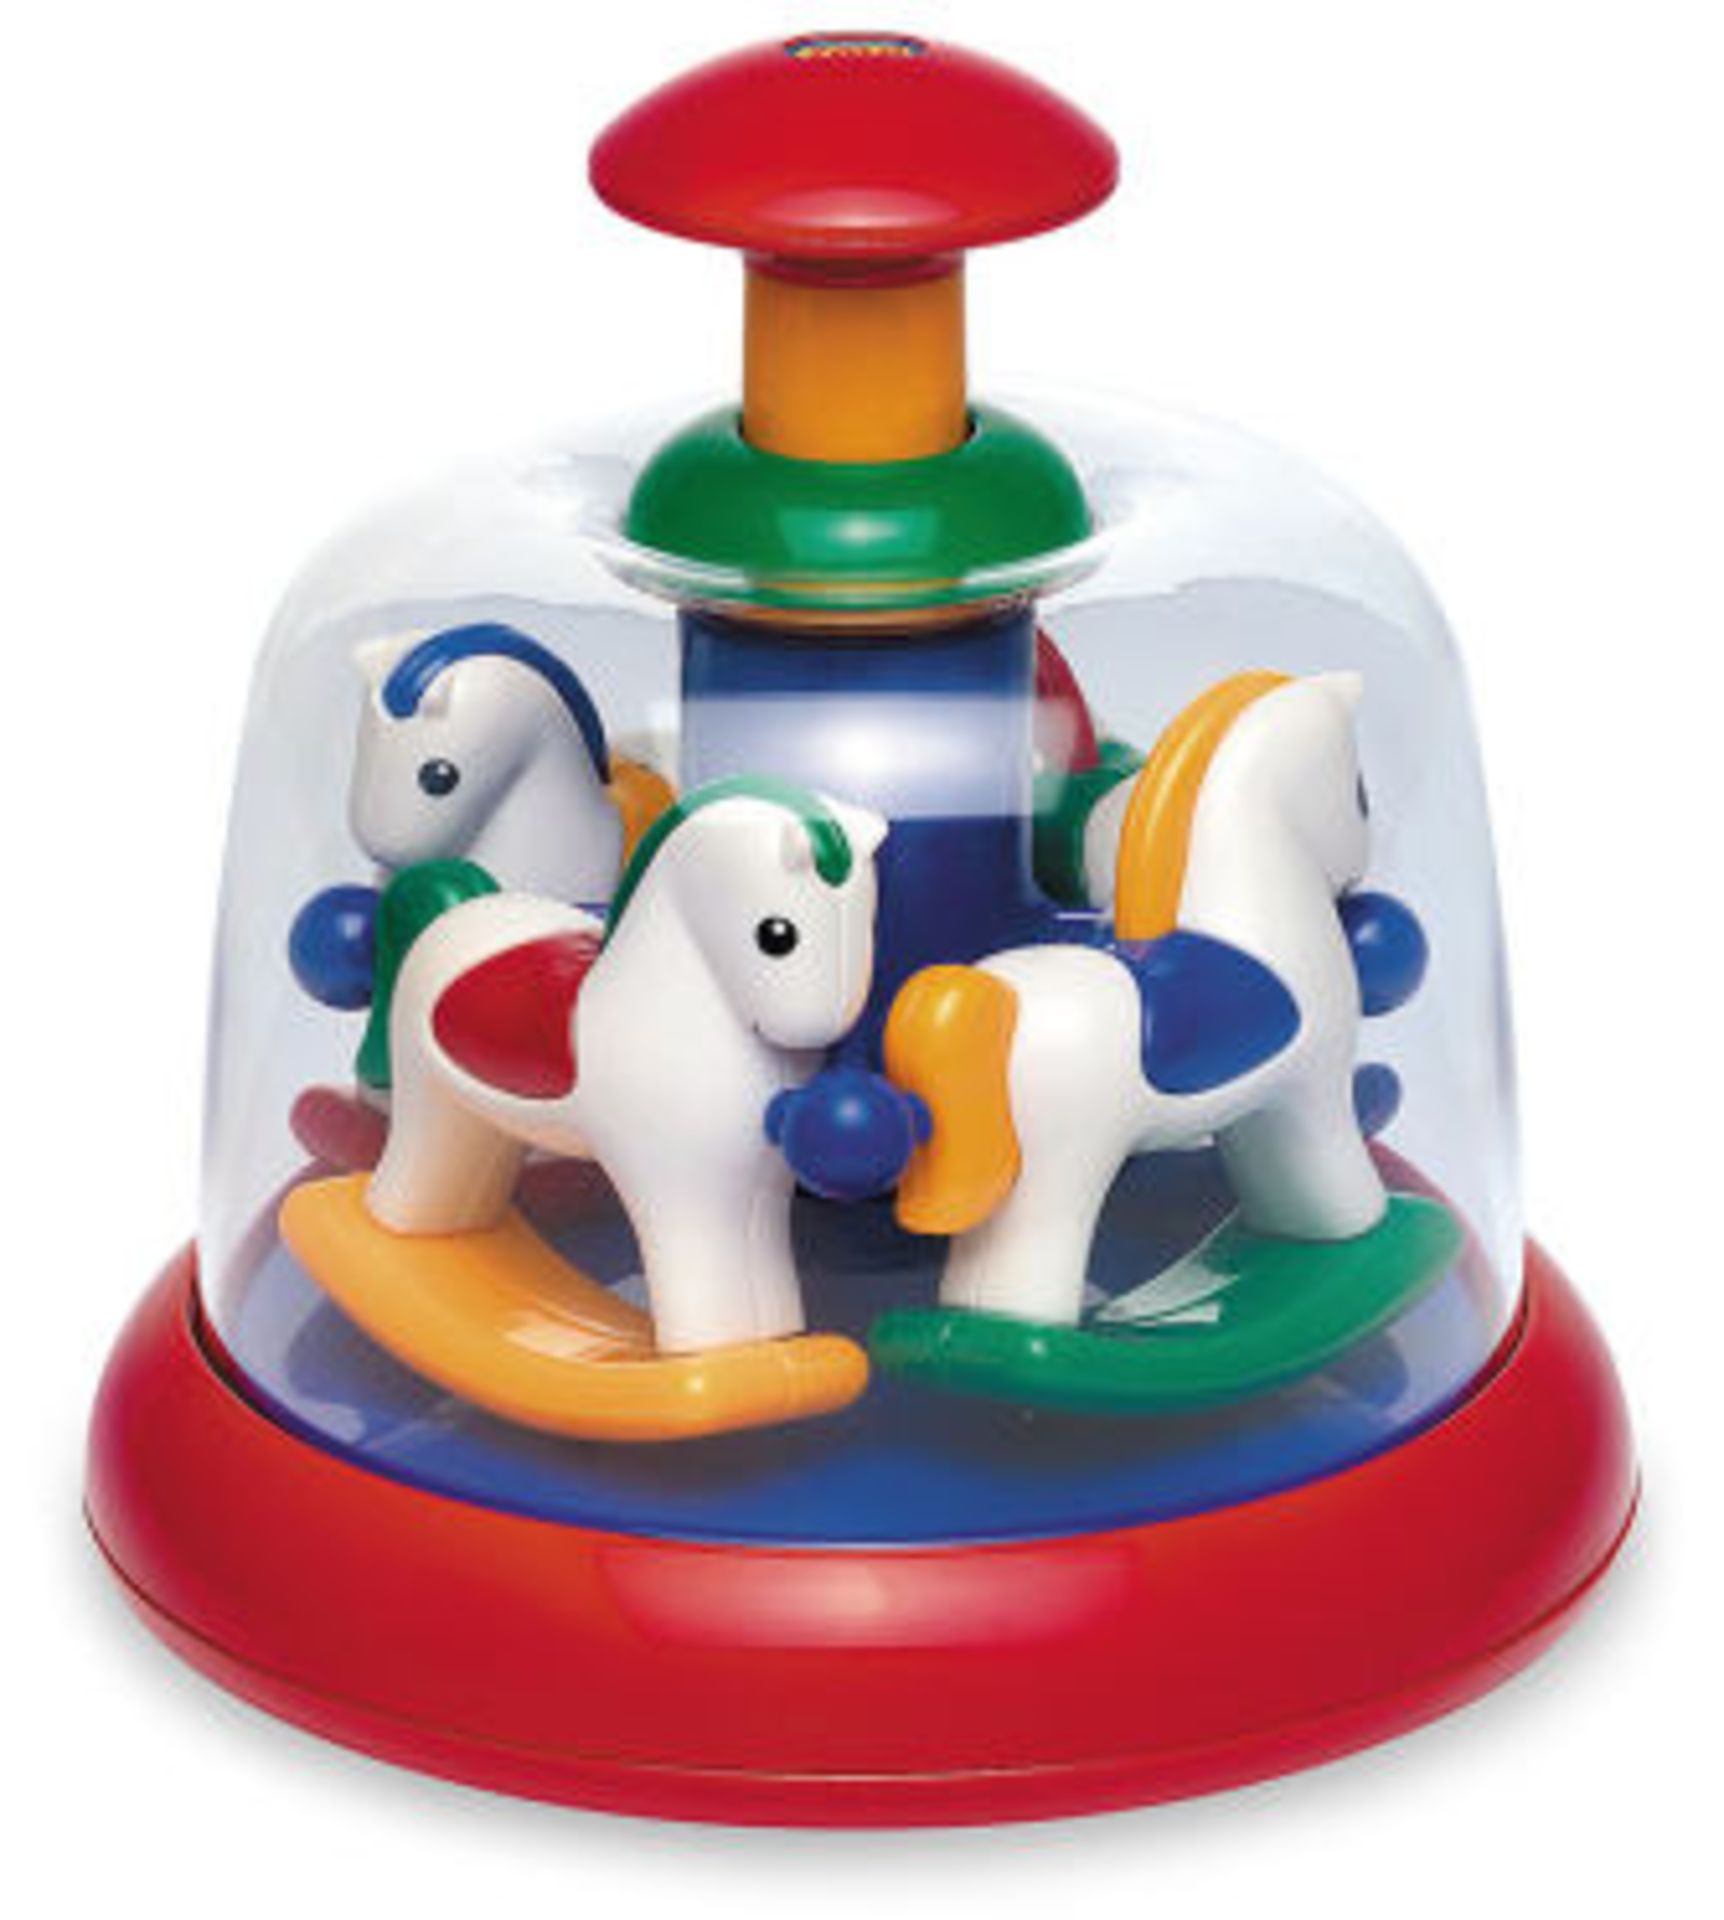 V Brand New Tolo Baby Pony Spinning Carousel Age 6mths+ ISP £28.49 (Ebay) X 2 YOUR BID PRICE TO BE